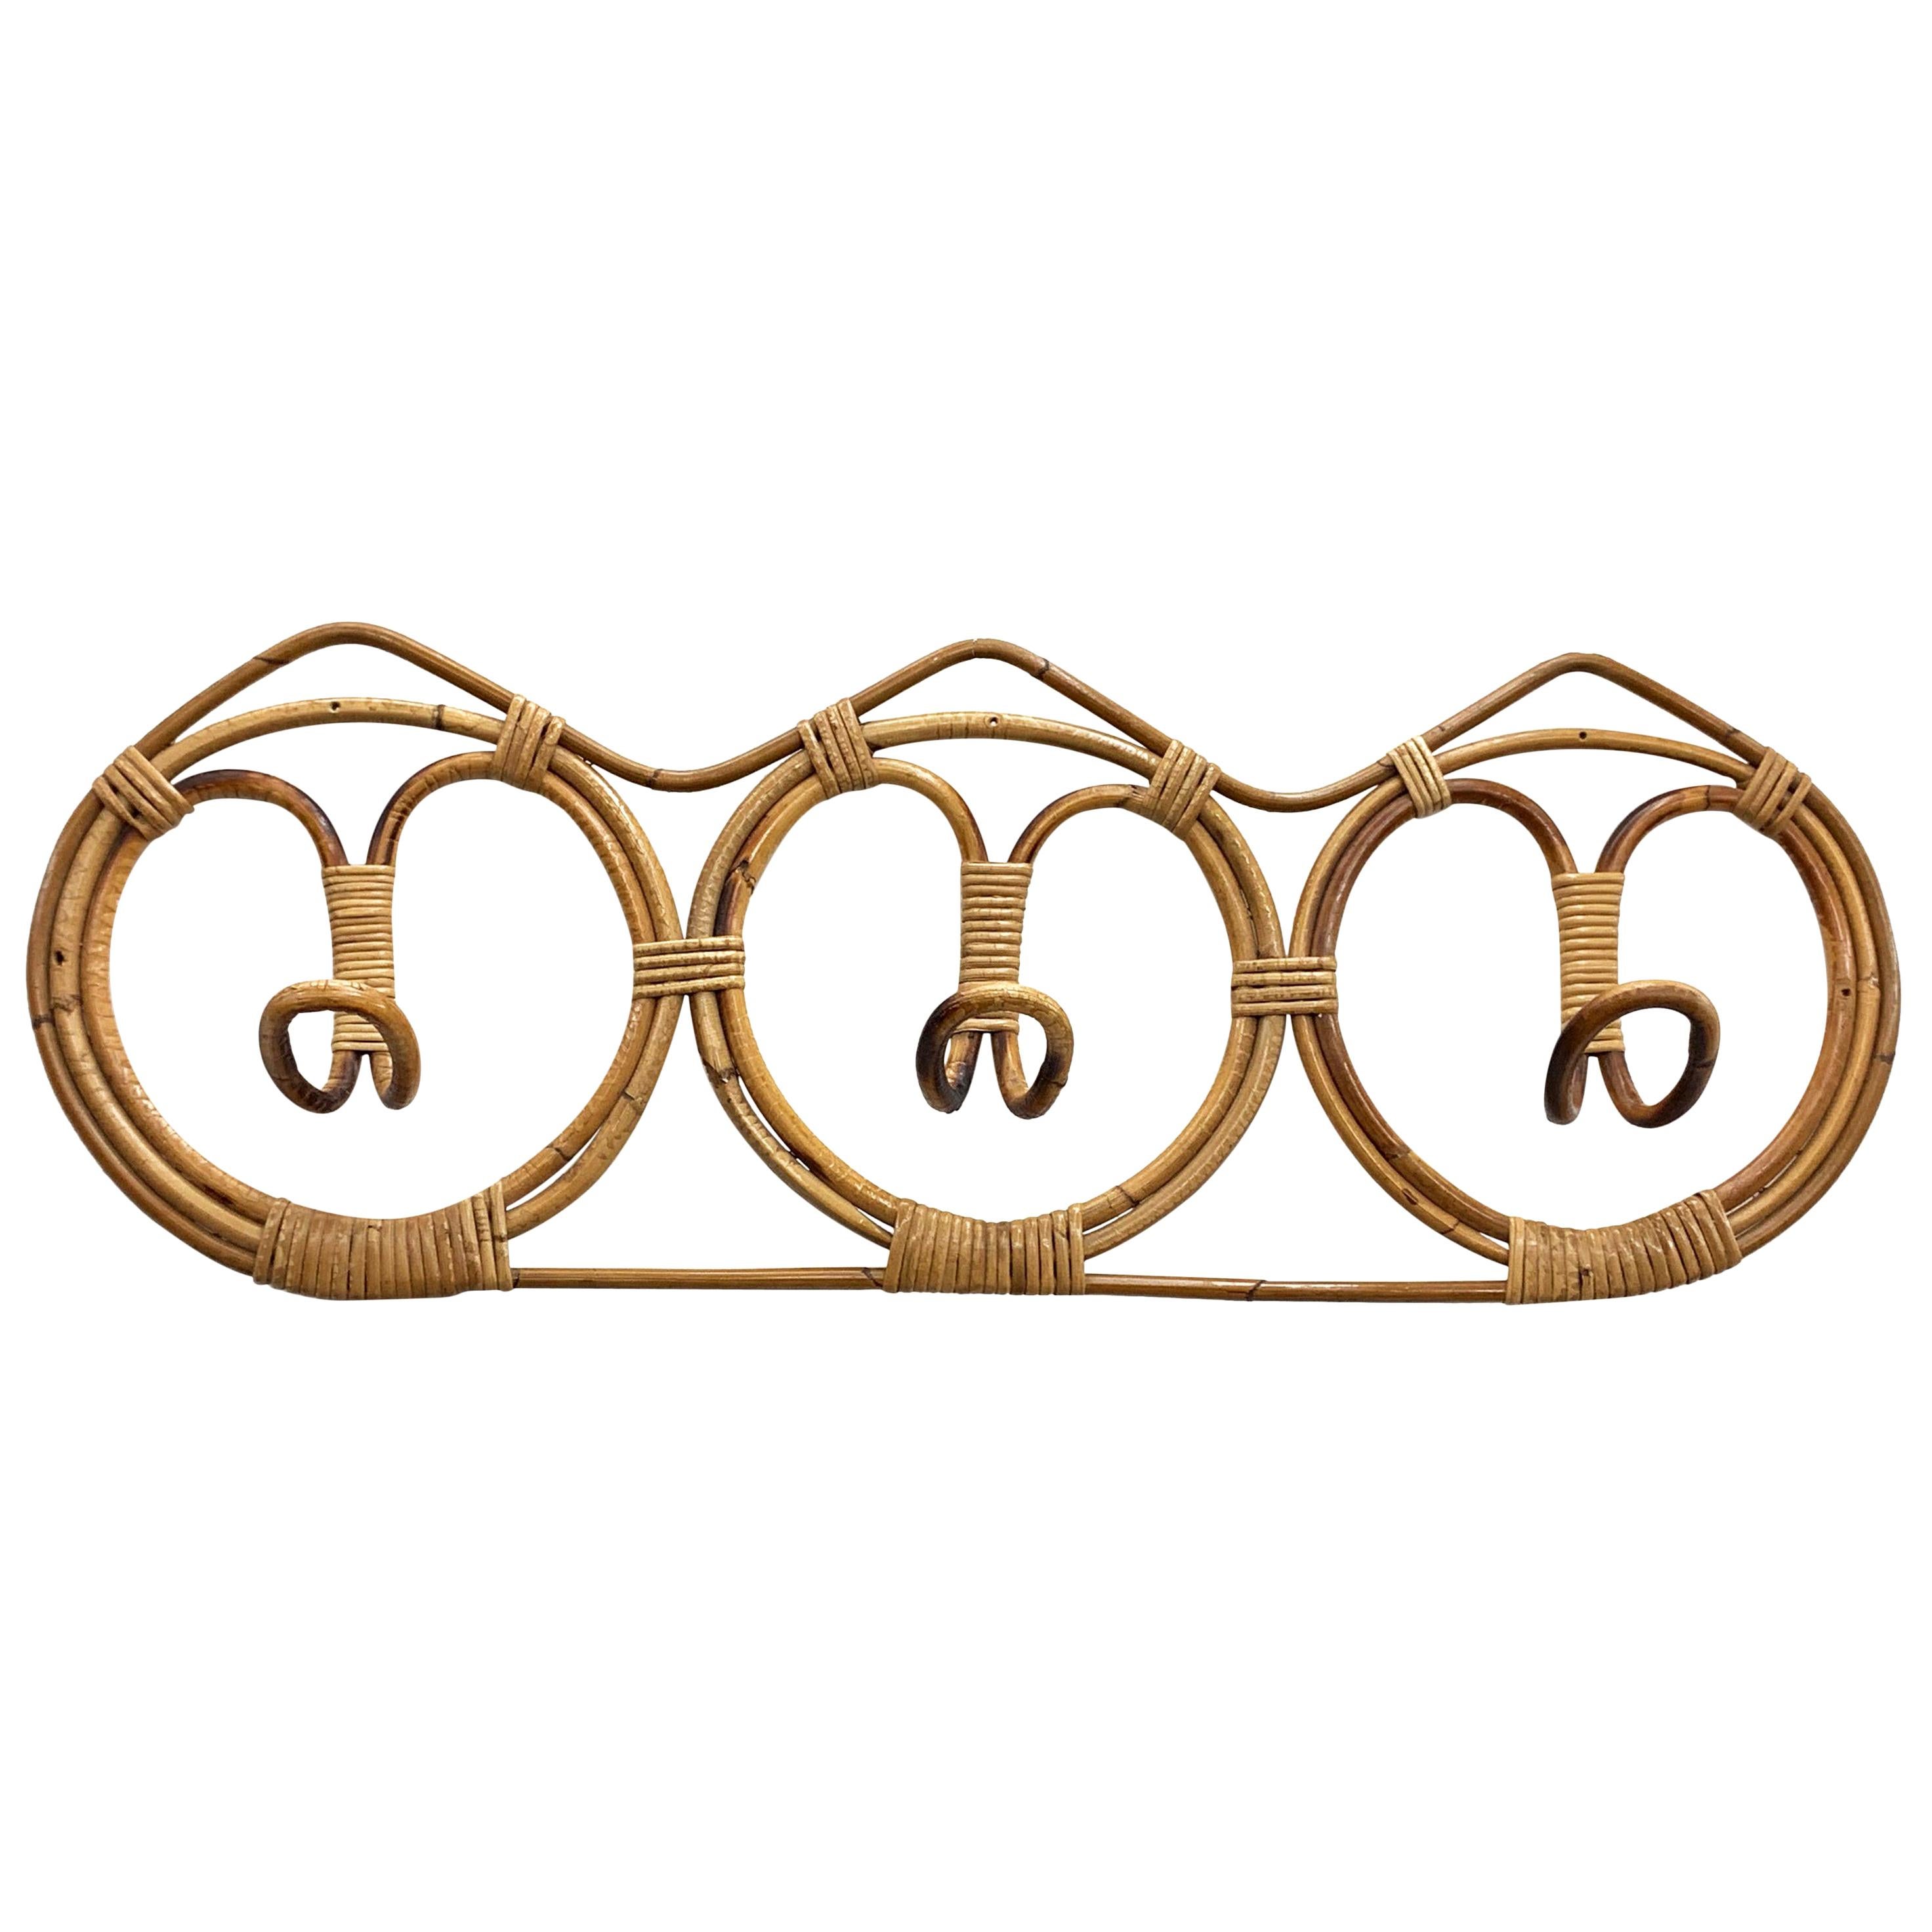 Midcentury Rattan and Bamboo Italian Coat Hook, 1960s For Sale